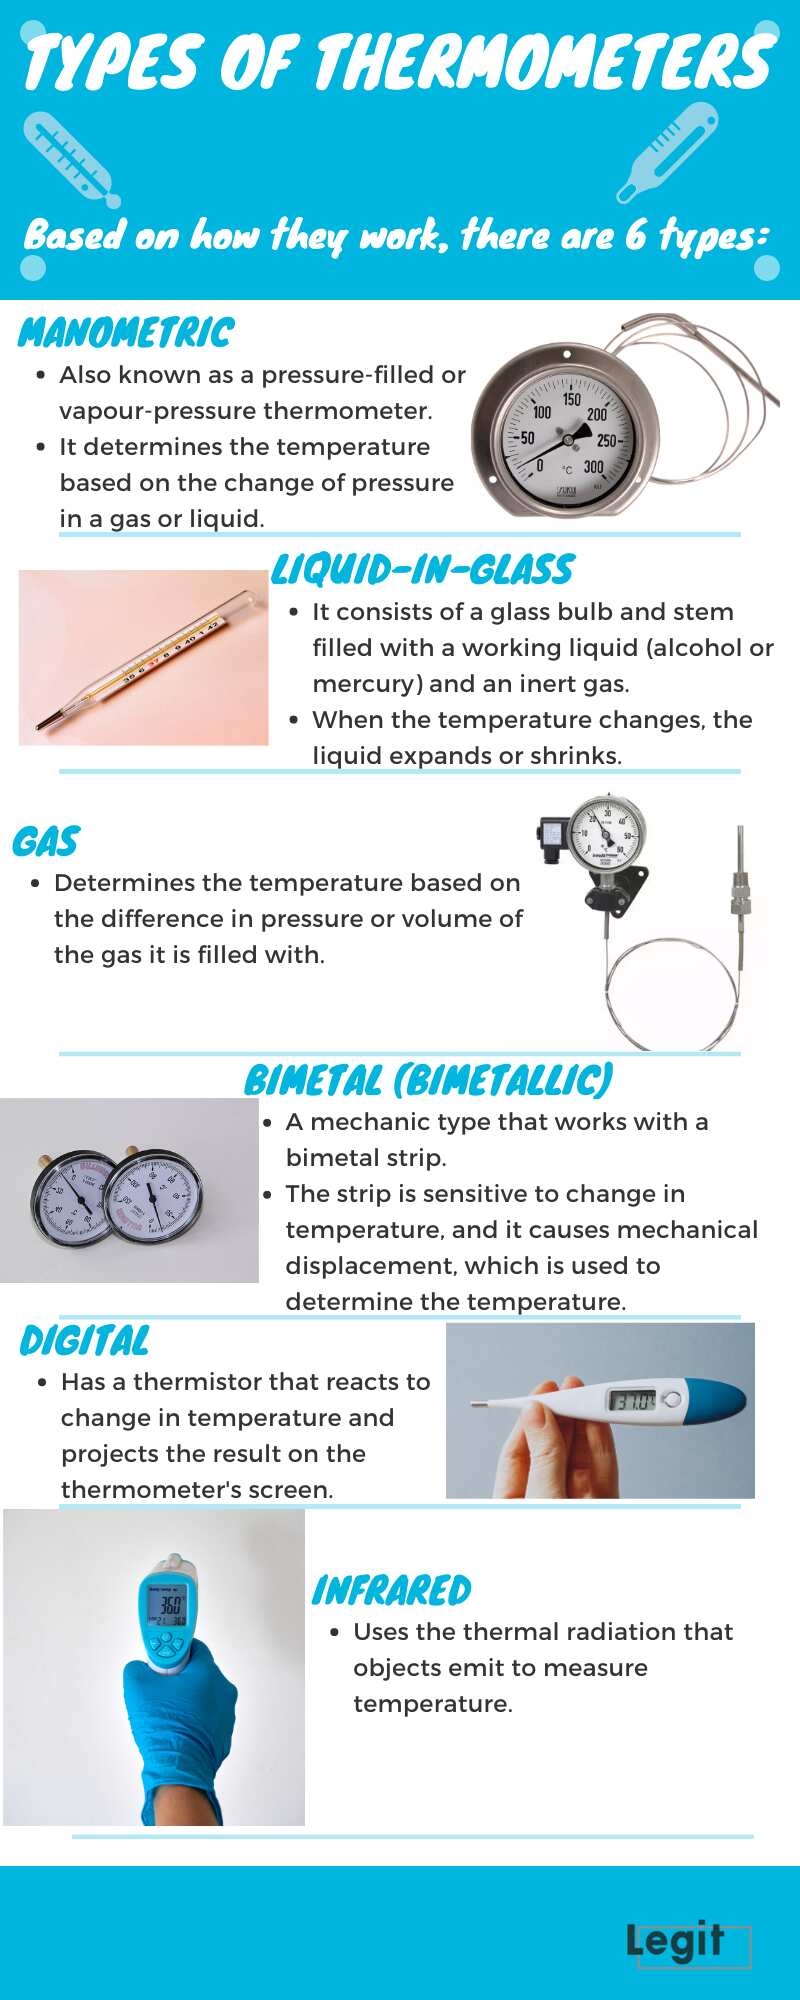 Types of thermometers